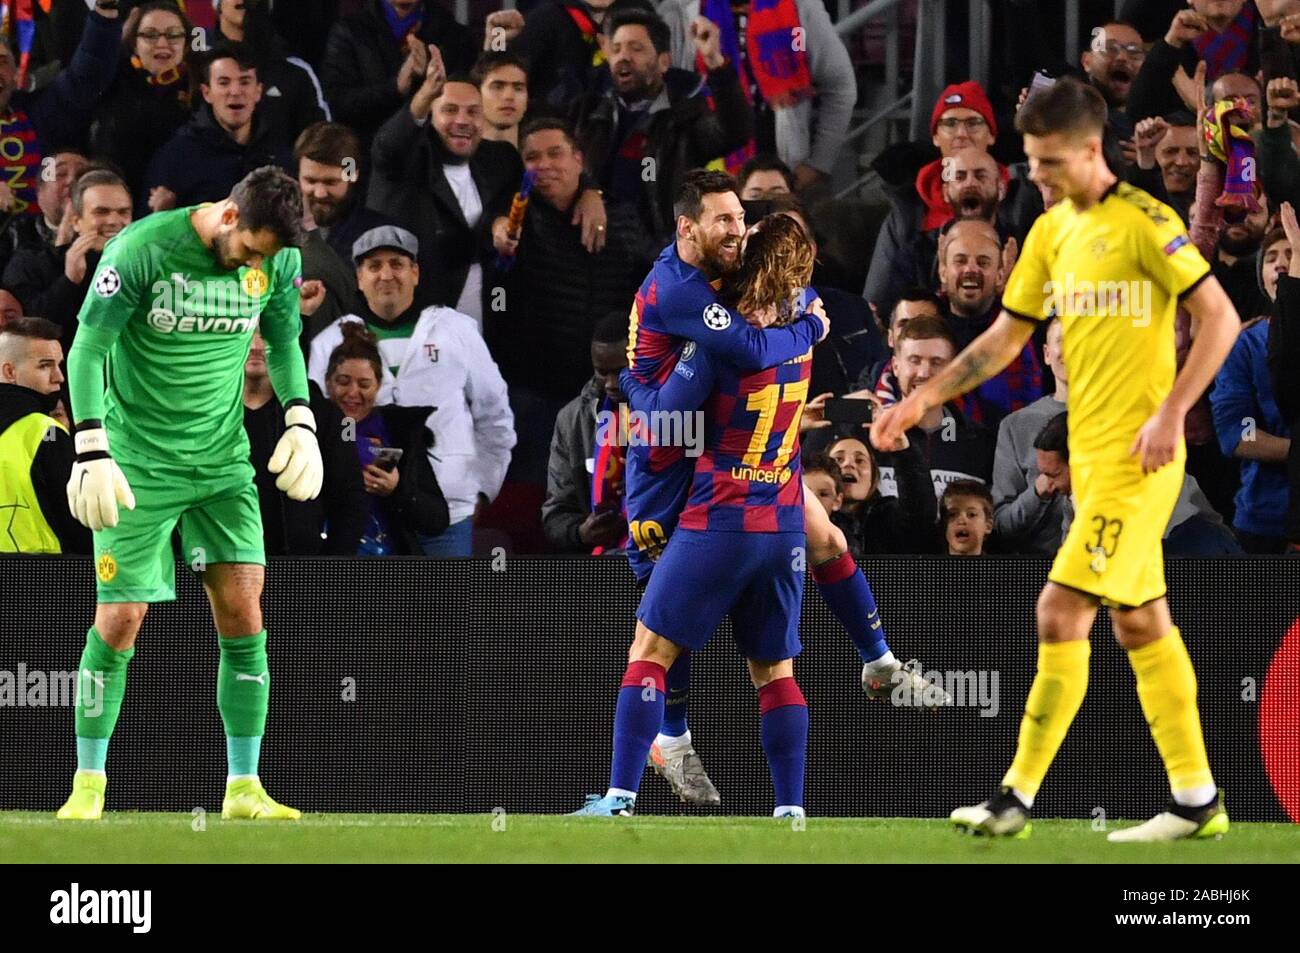 Barcelona, Spain. 27th Nov, 2019. Soccer: Champions League, Group stage, Group F, 5th matchday, FC Barcelona - Borussia Dortmund at Camp Nou. Barcelona's Lionel Messi (M) cheers his 2-0 goal with Barcelona's Antoine Griezmann. Dortmund's goalkeeper Roman Bürki (l) and Dortmund's player Julian Weigl (r) are disappointed. Credit: Marius Becker/dpa/Alamy Live News Stock Photo